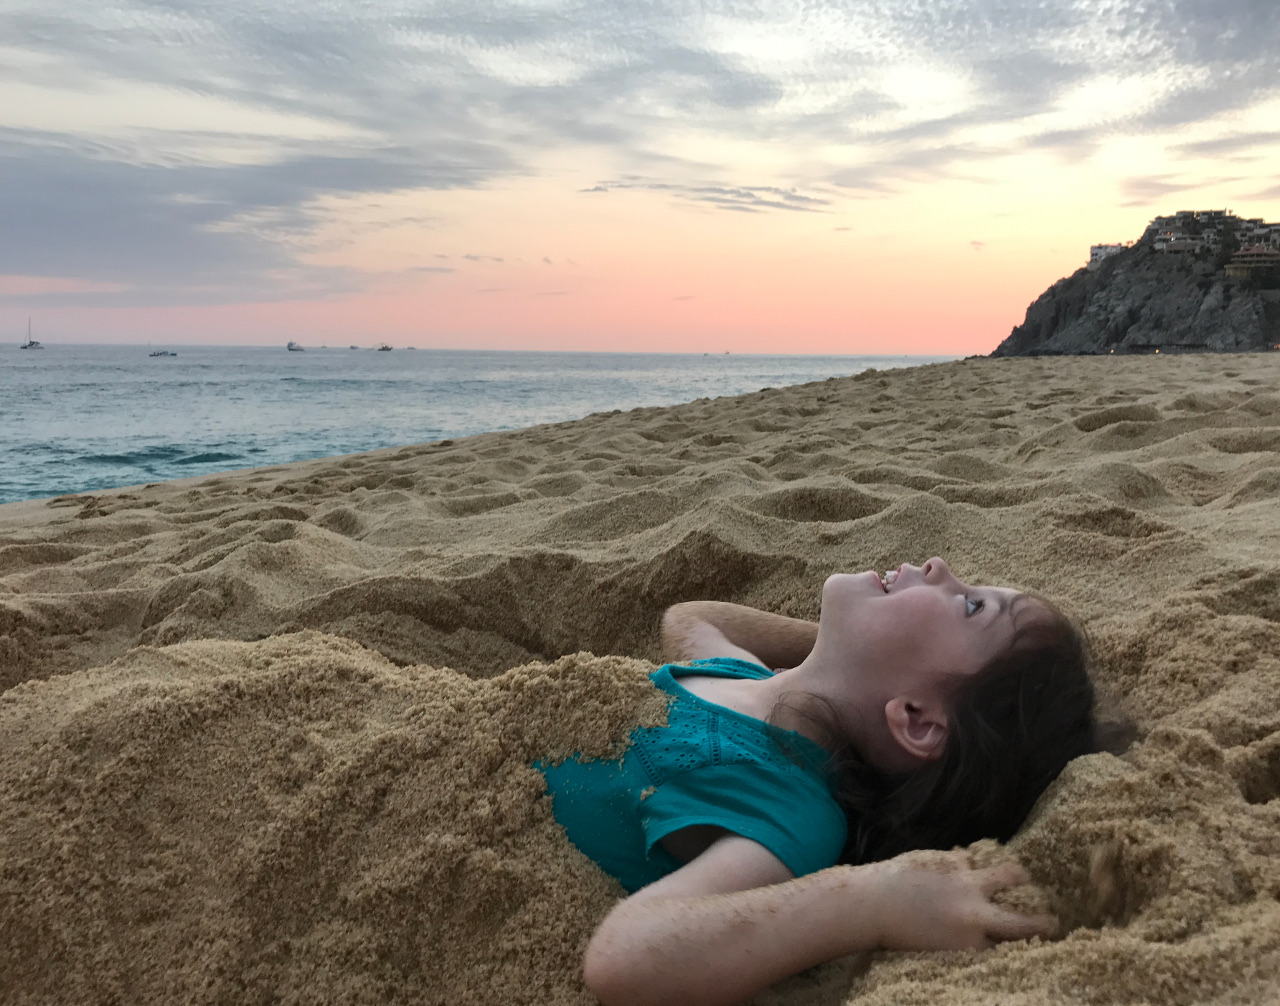 My Daughter Burred In Sand, Underneath the Clouds